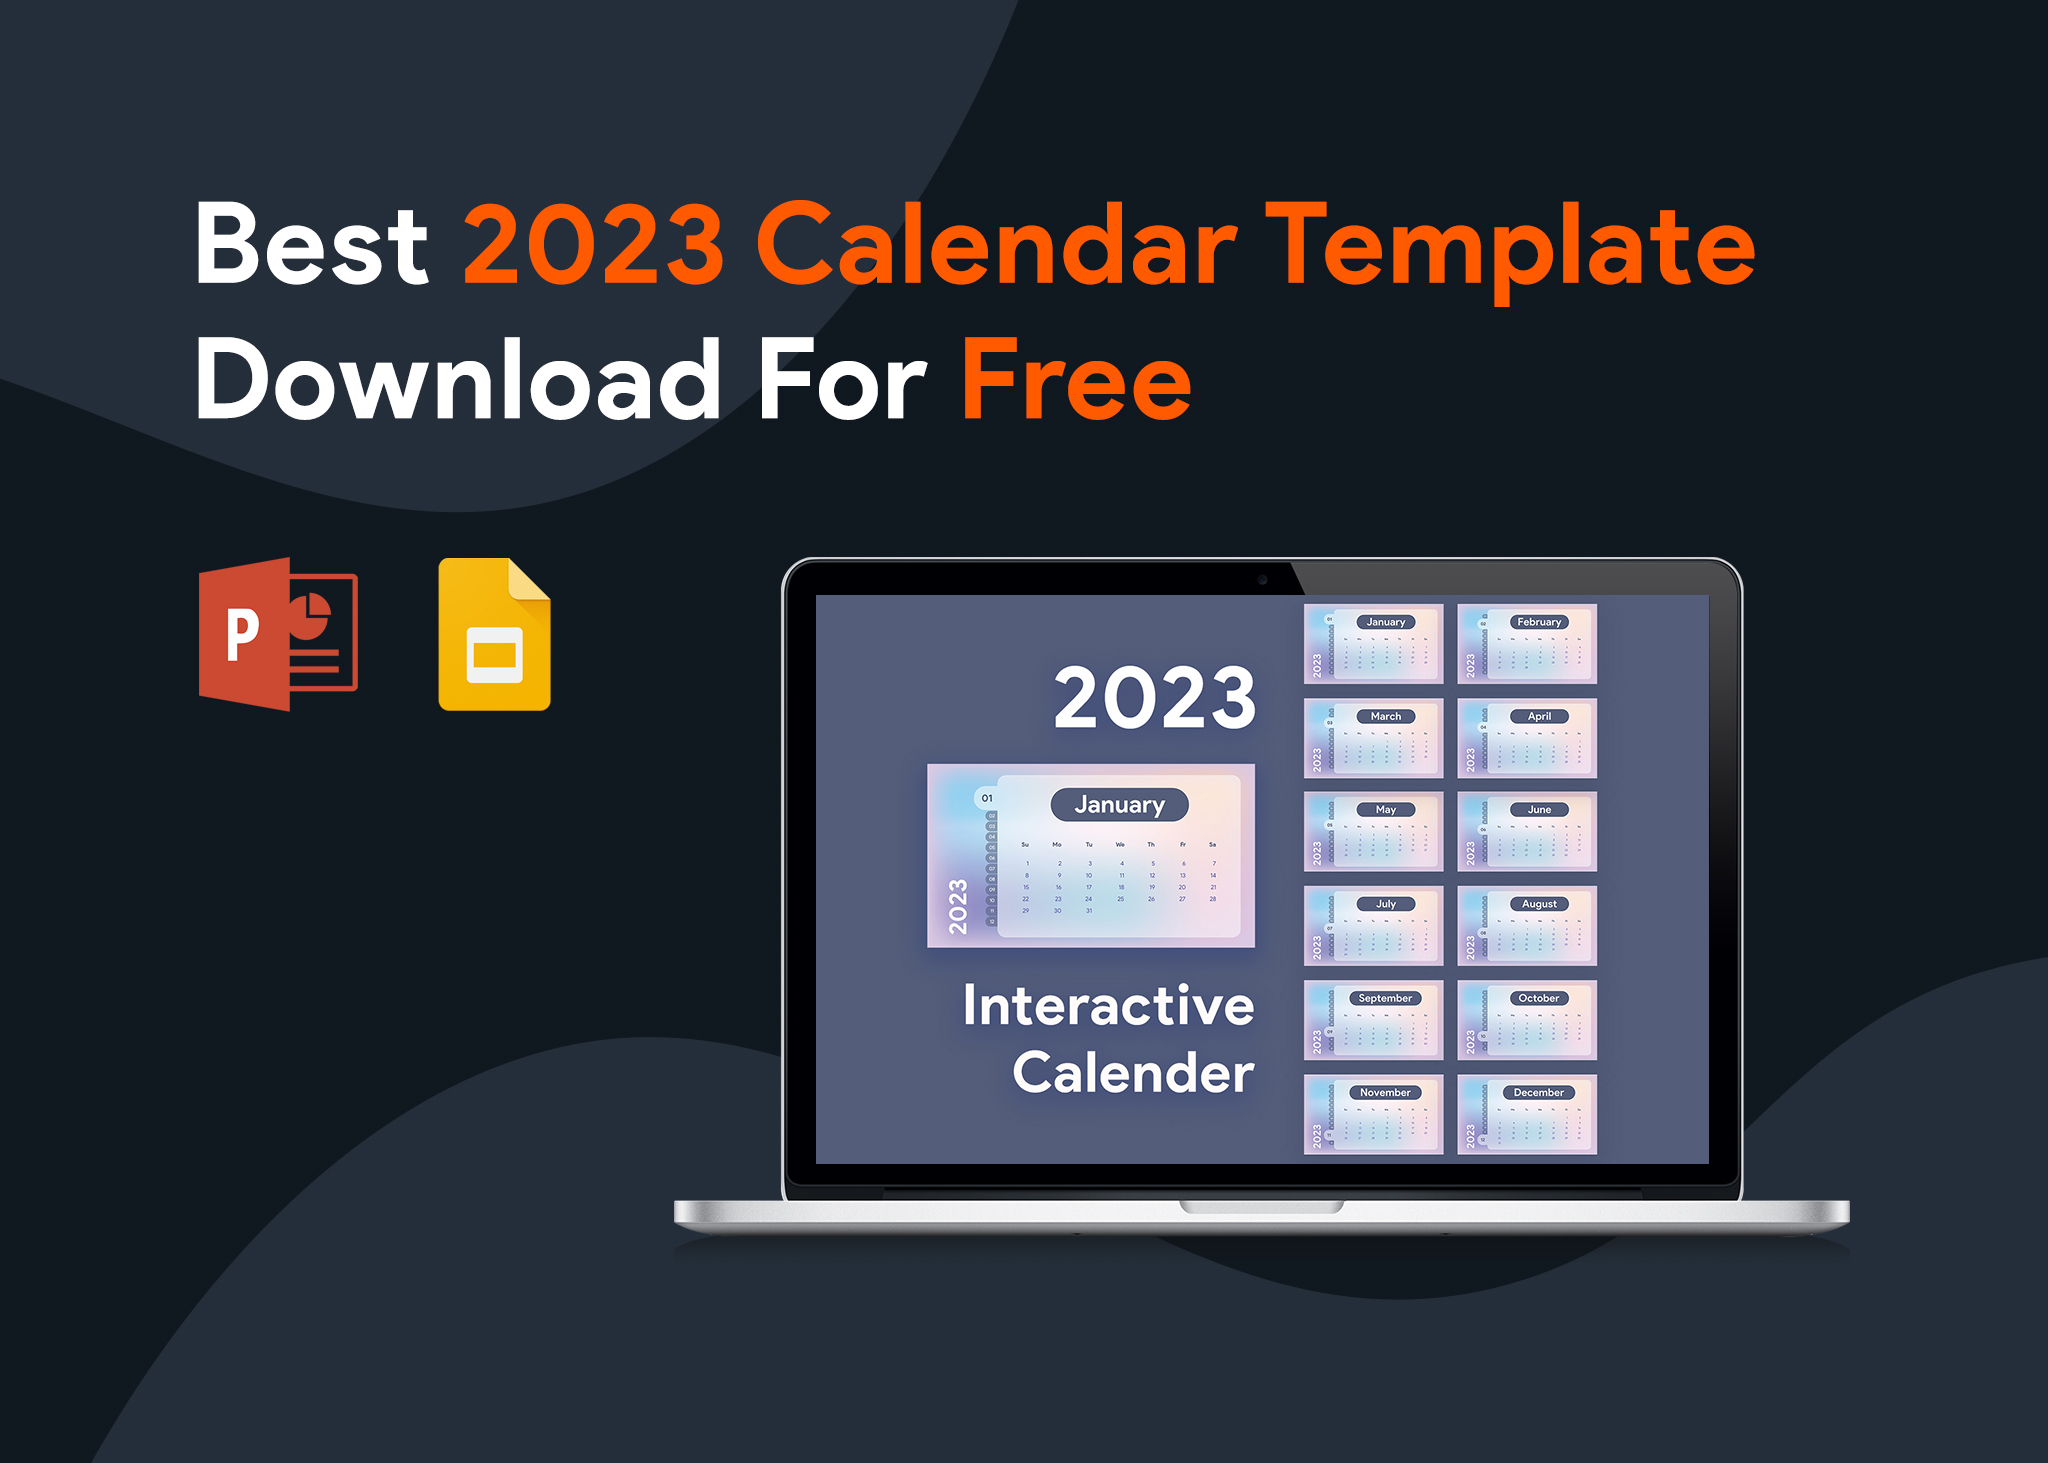 best 2023 calendar template available today